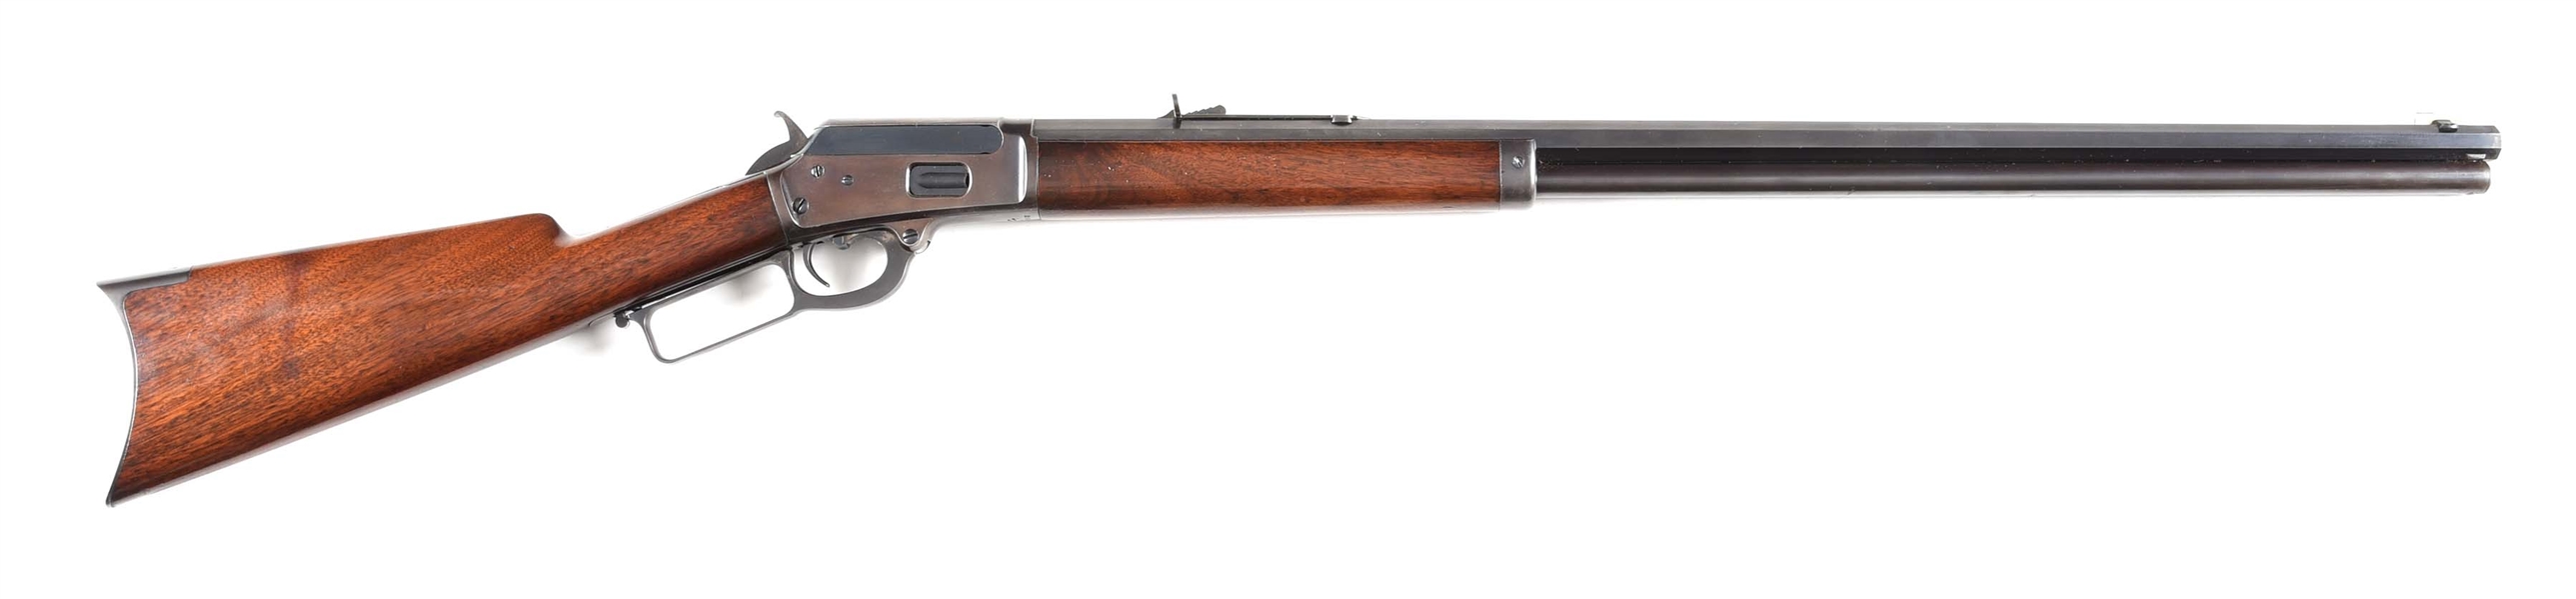 (A) FIRST YEAR PRODUCTION MARLIN MODEL 1889 LEVER ACTION RIFLE (1889).